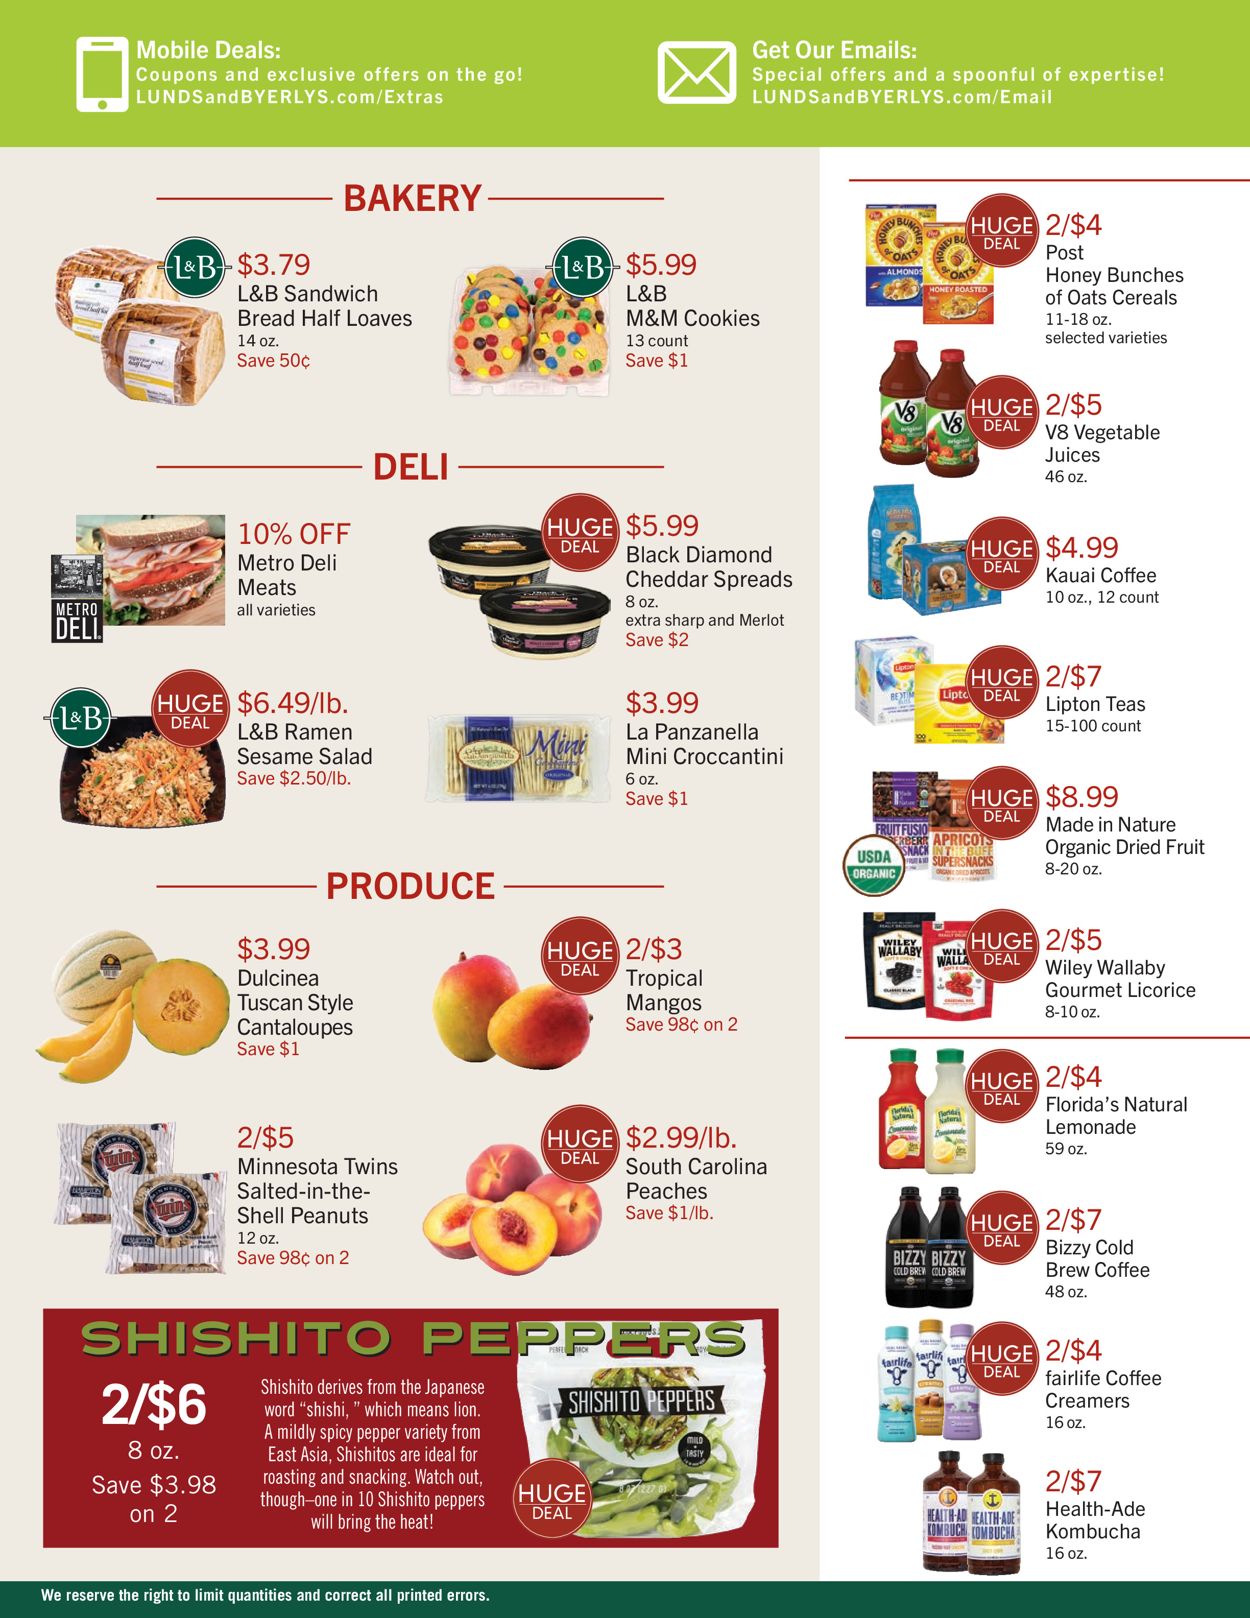 Catalogue Lunds & Byerlys from 06/10/2021